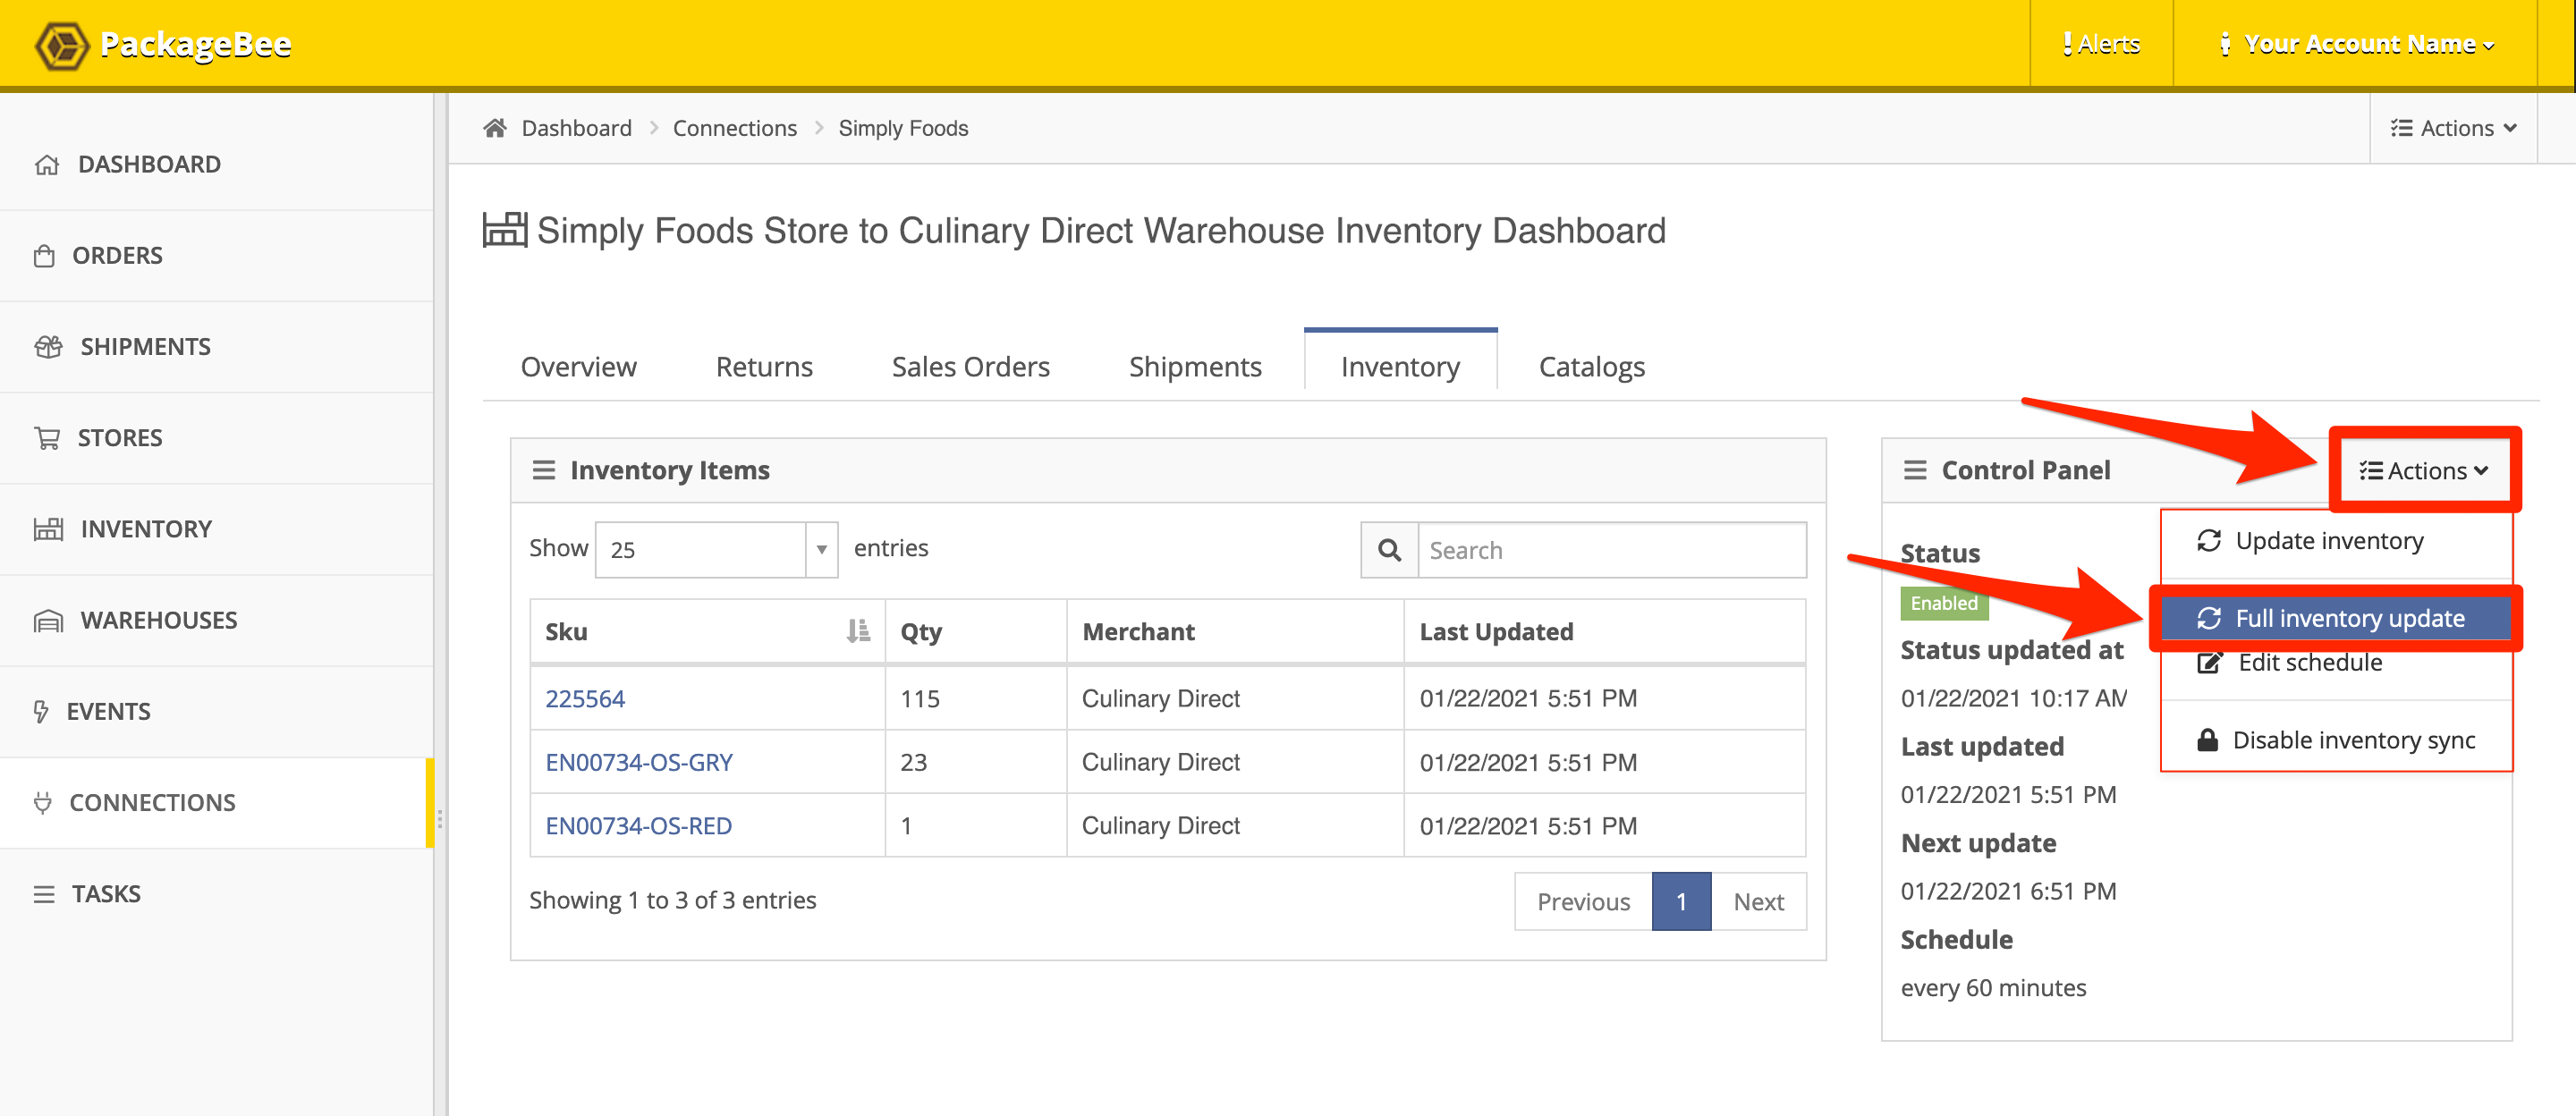 In Control Panel, click Actions, Full inventory update.